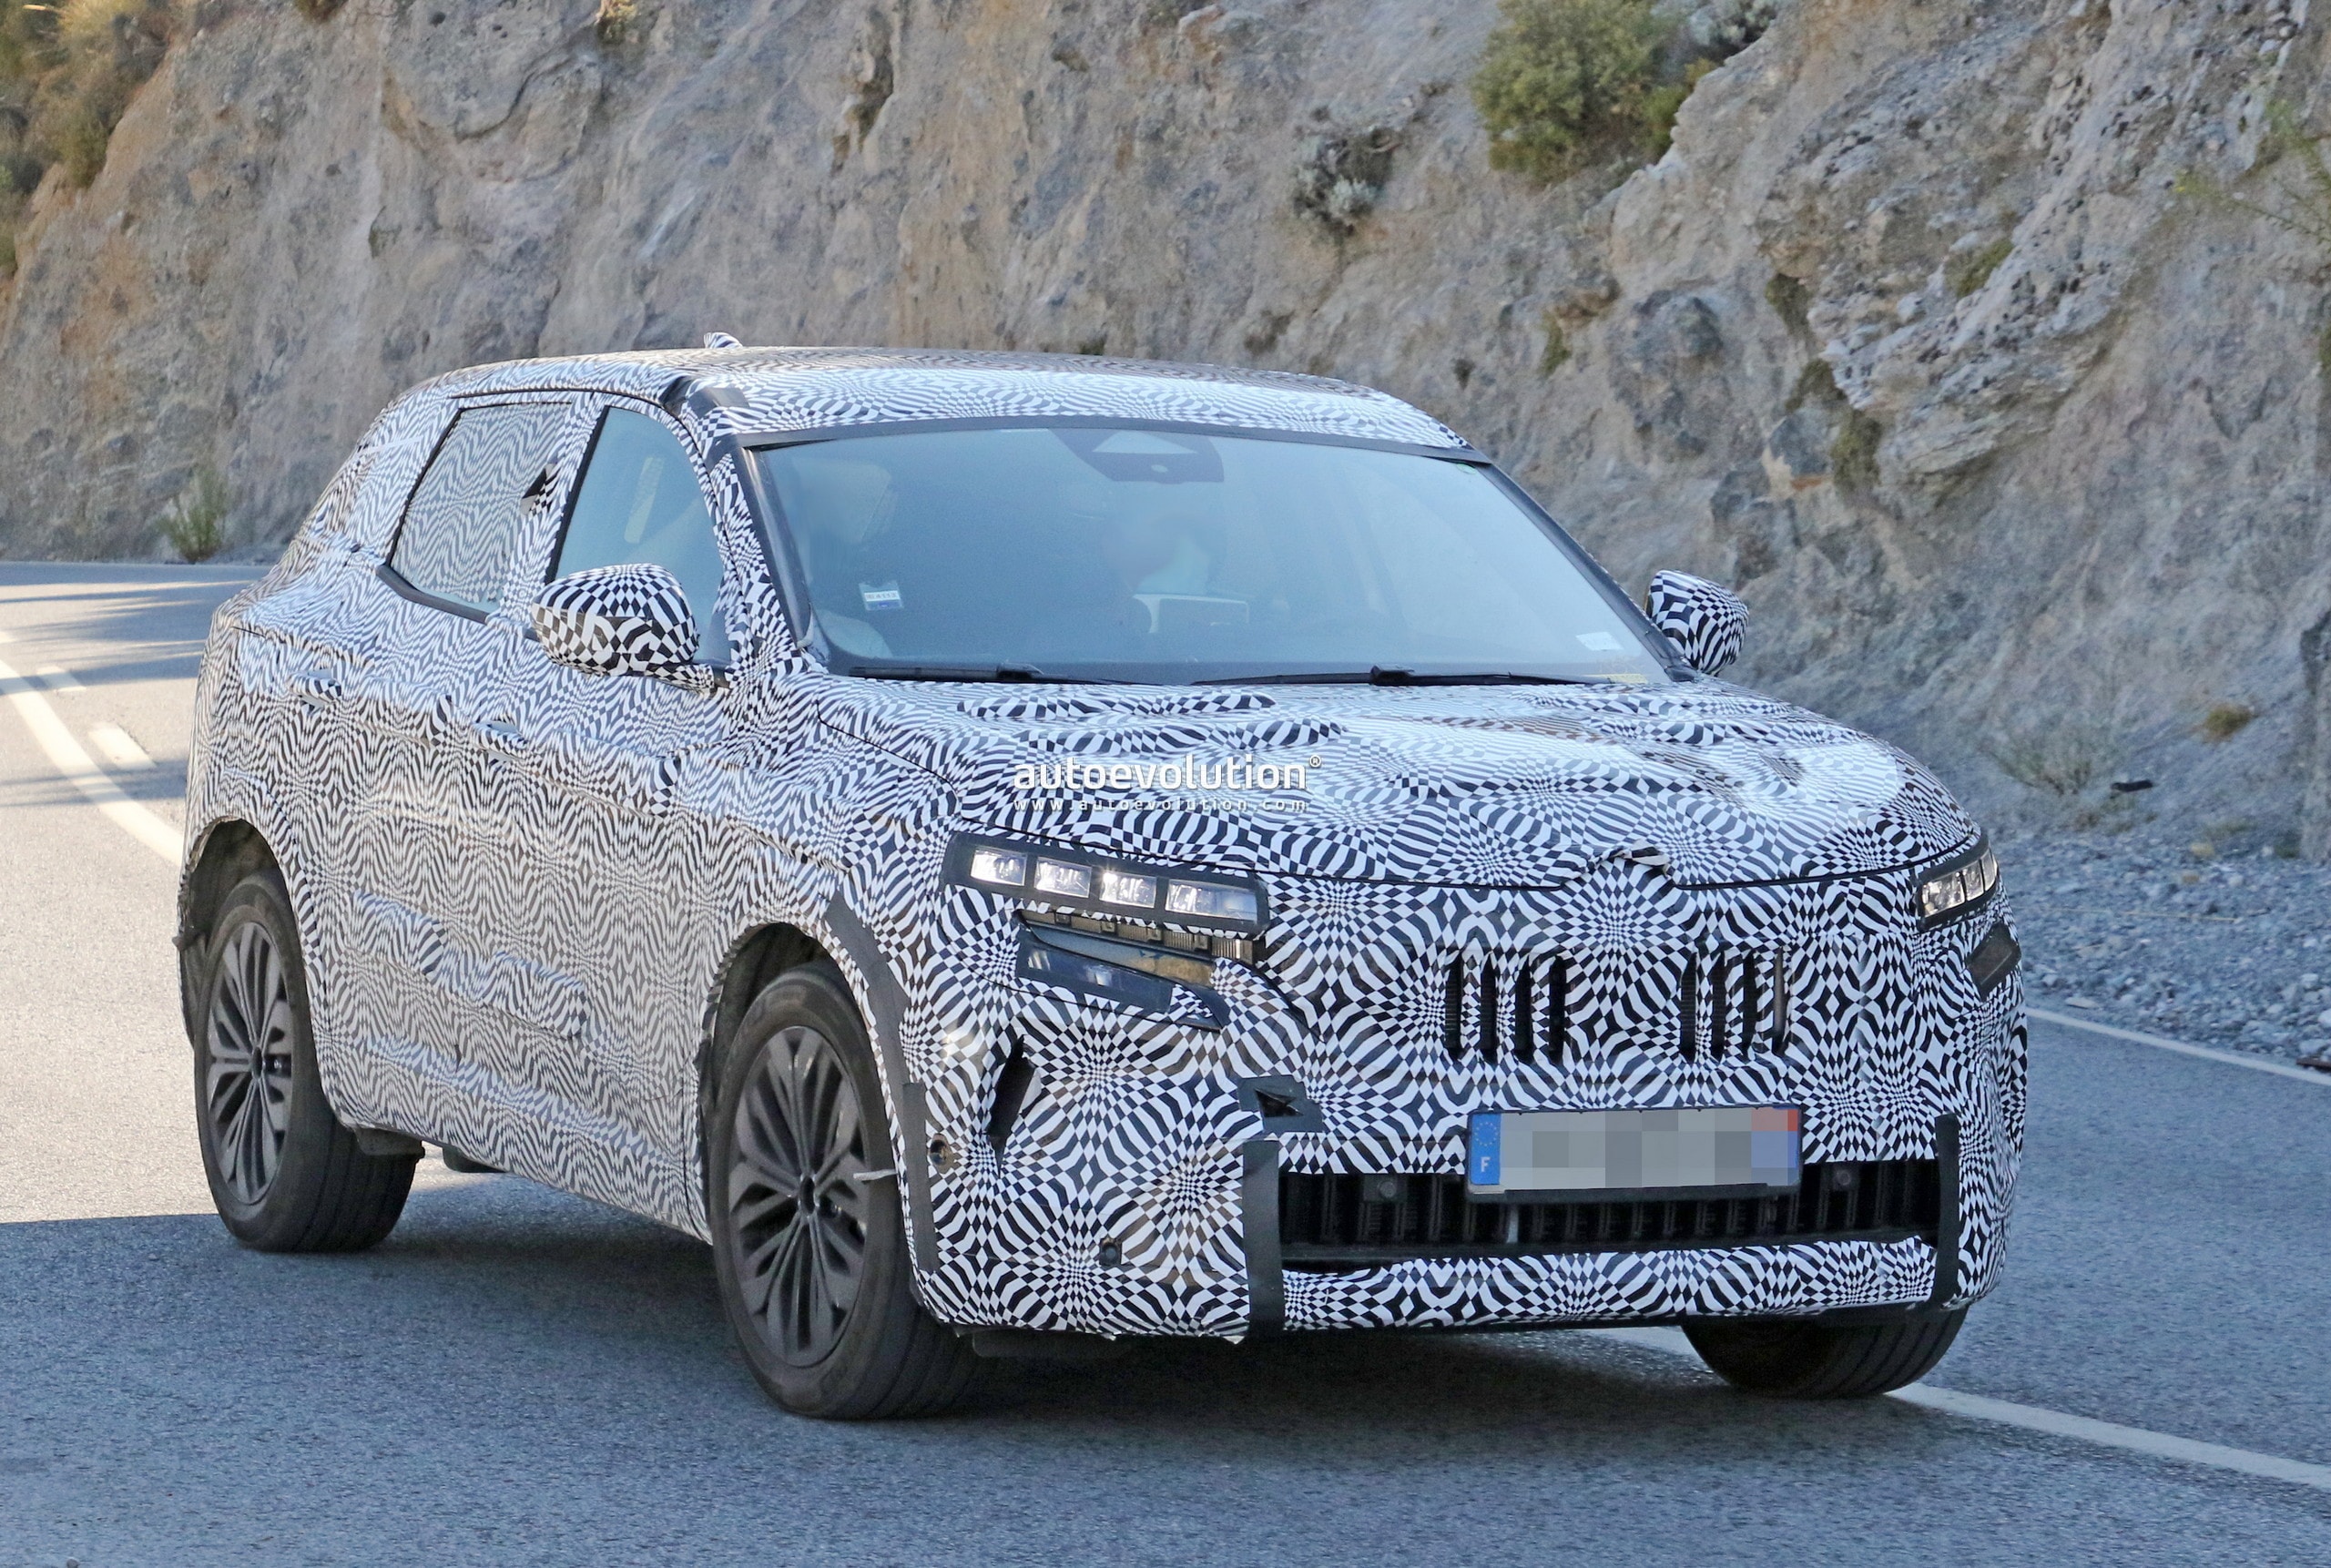 2022 Renault Kadjar Shows Fresh Design Inside and Out in New Spy Shots -  autoevolution